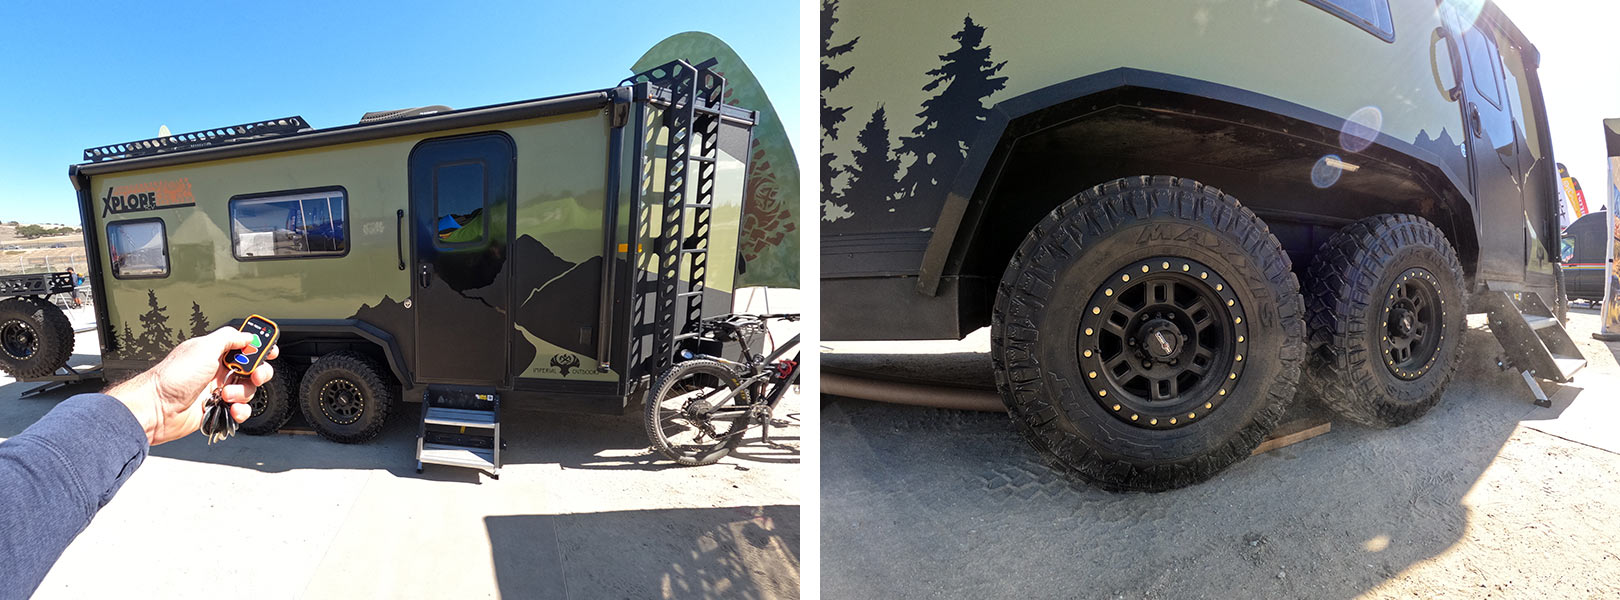 imperial outdoors offroad overland camper trailer details and interior features